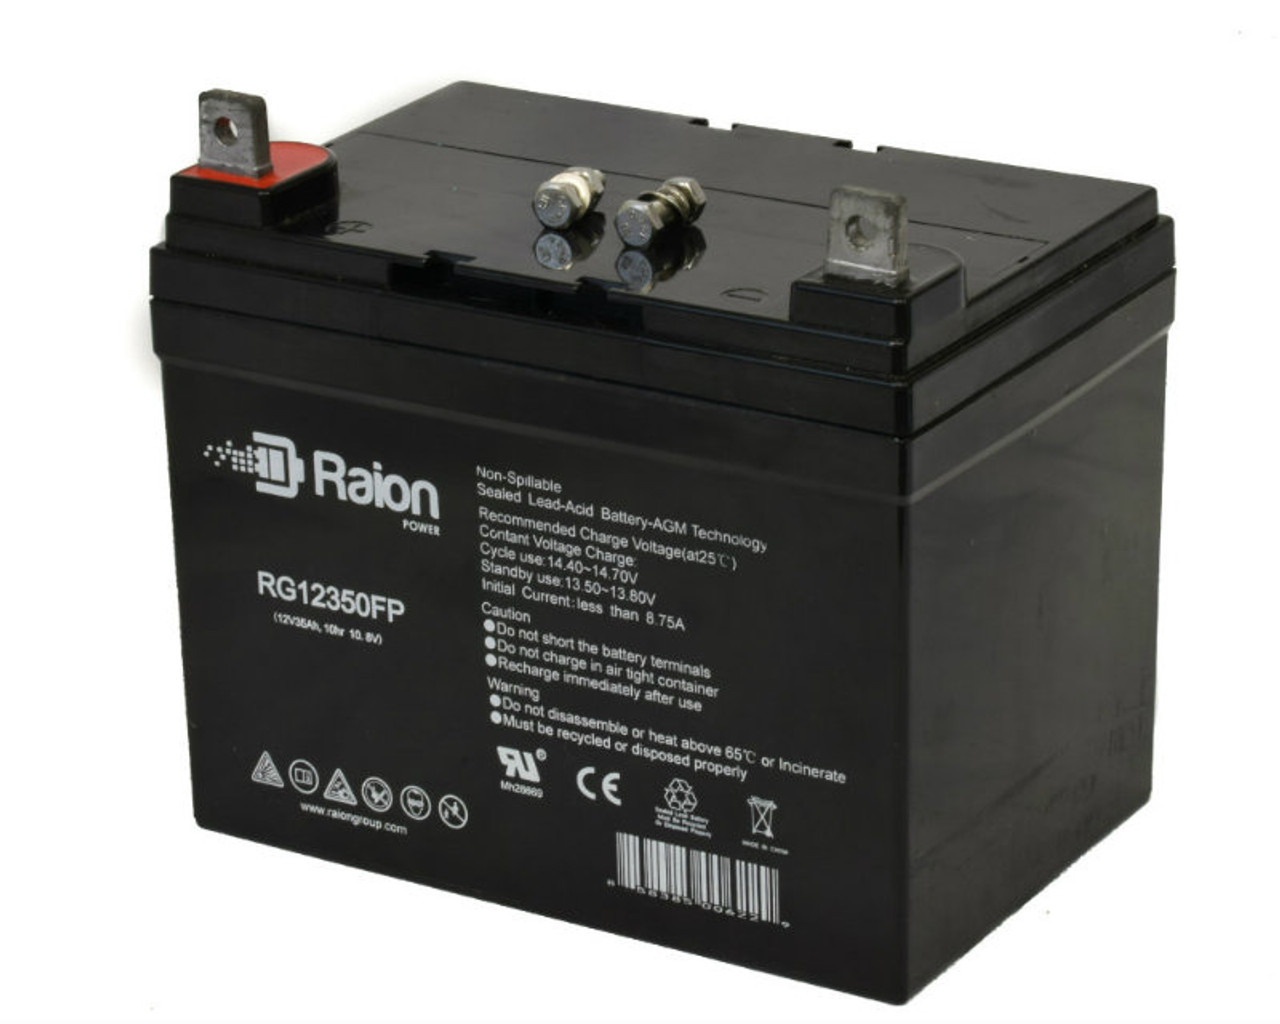 Raion Power Replacement 12V 35Ah Battery for Bolens 13AG683H163 - 1 Pack